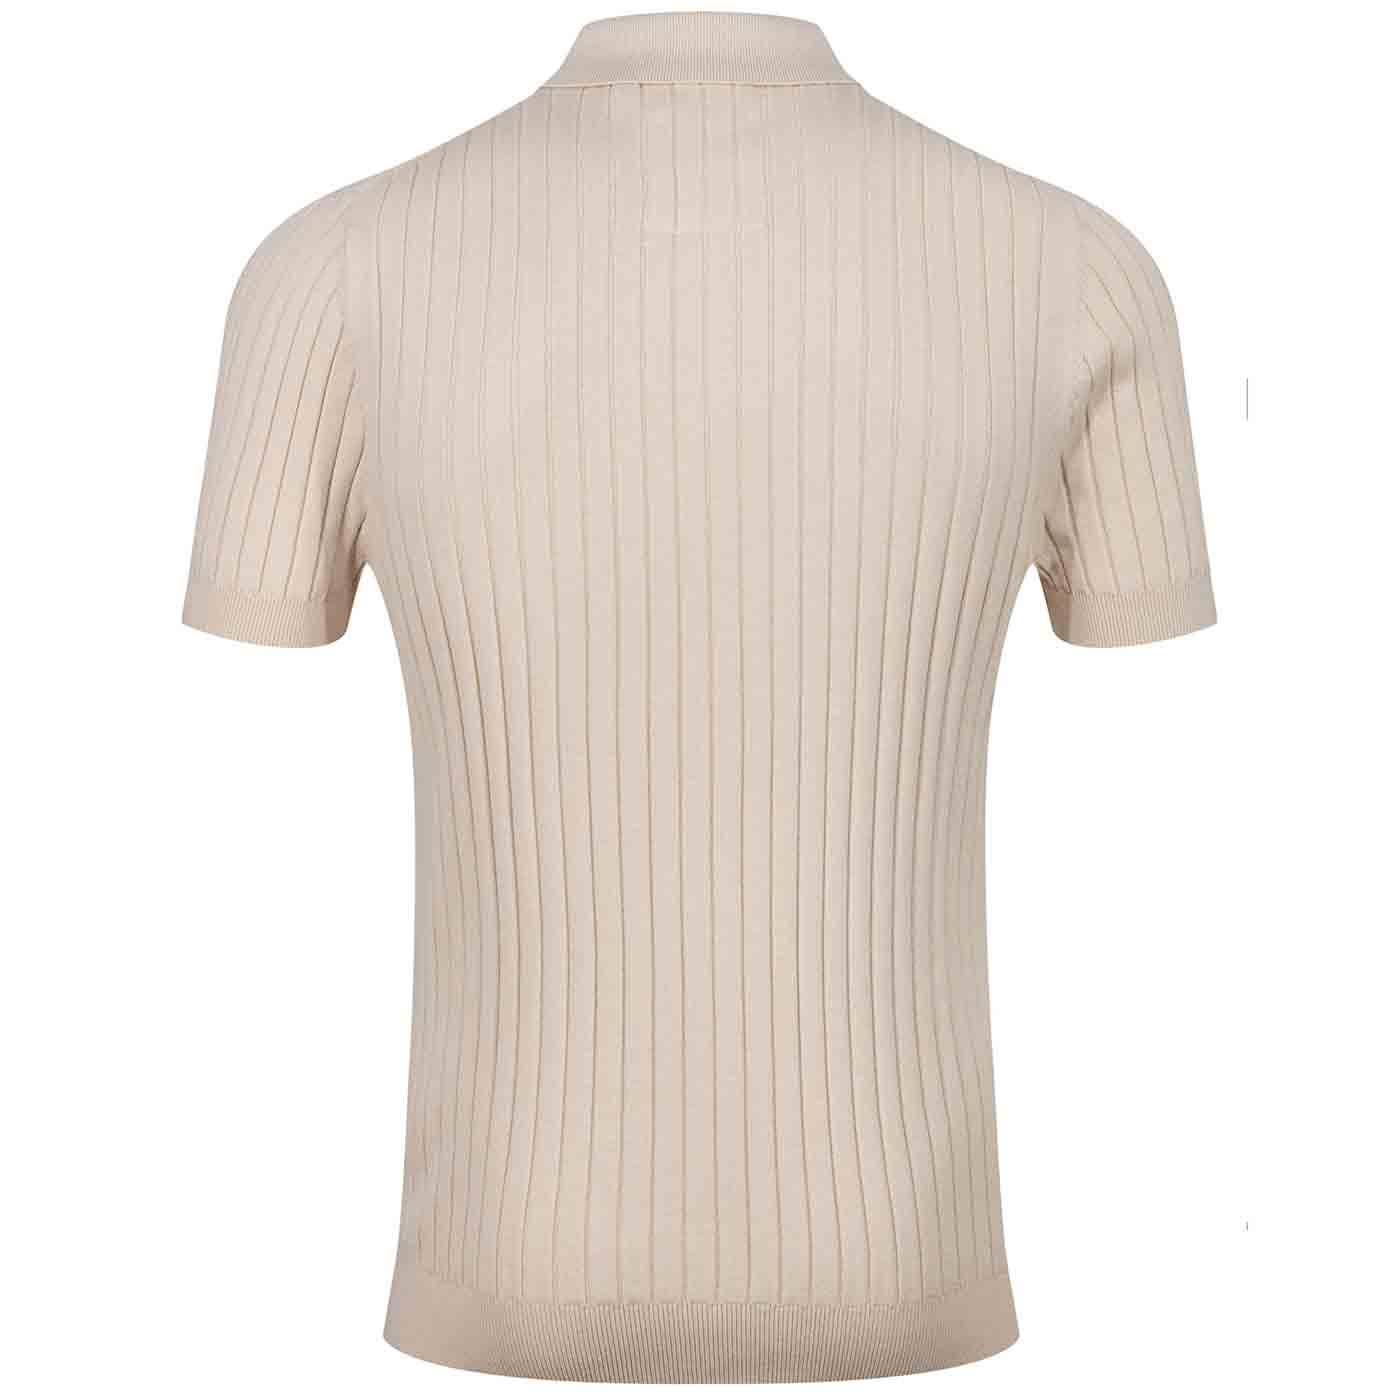 Vintage Beige Striped Shirt Mens Small, 90s New Old Stock Heritage